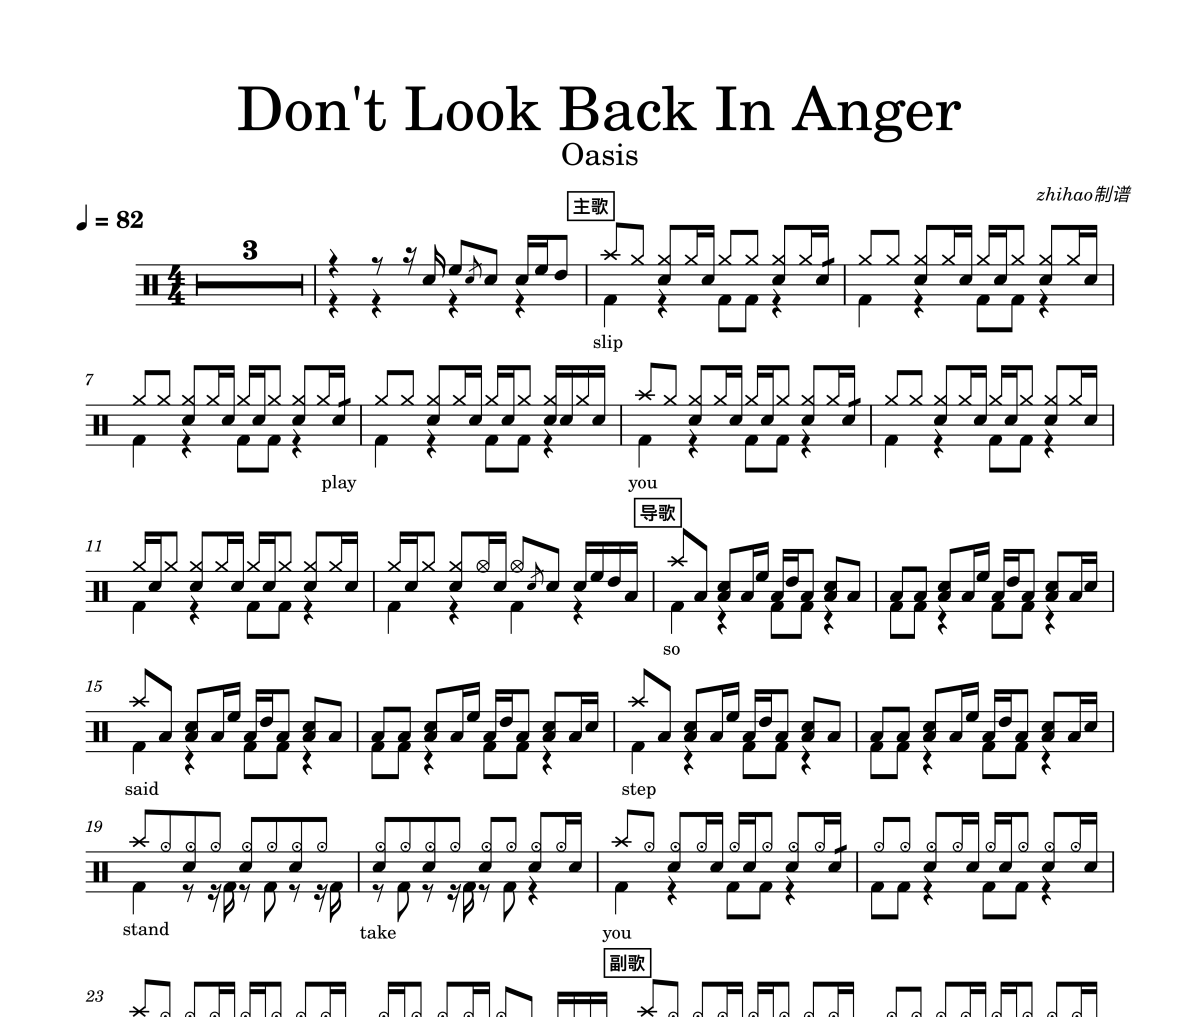 Oasis-Don‘t Look Back In Anger架子鼓谱爵士鼓曲谱